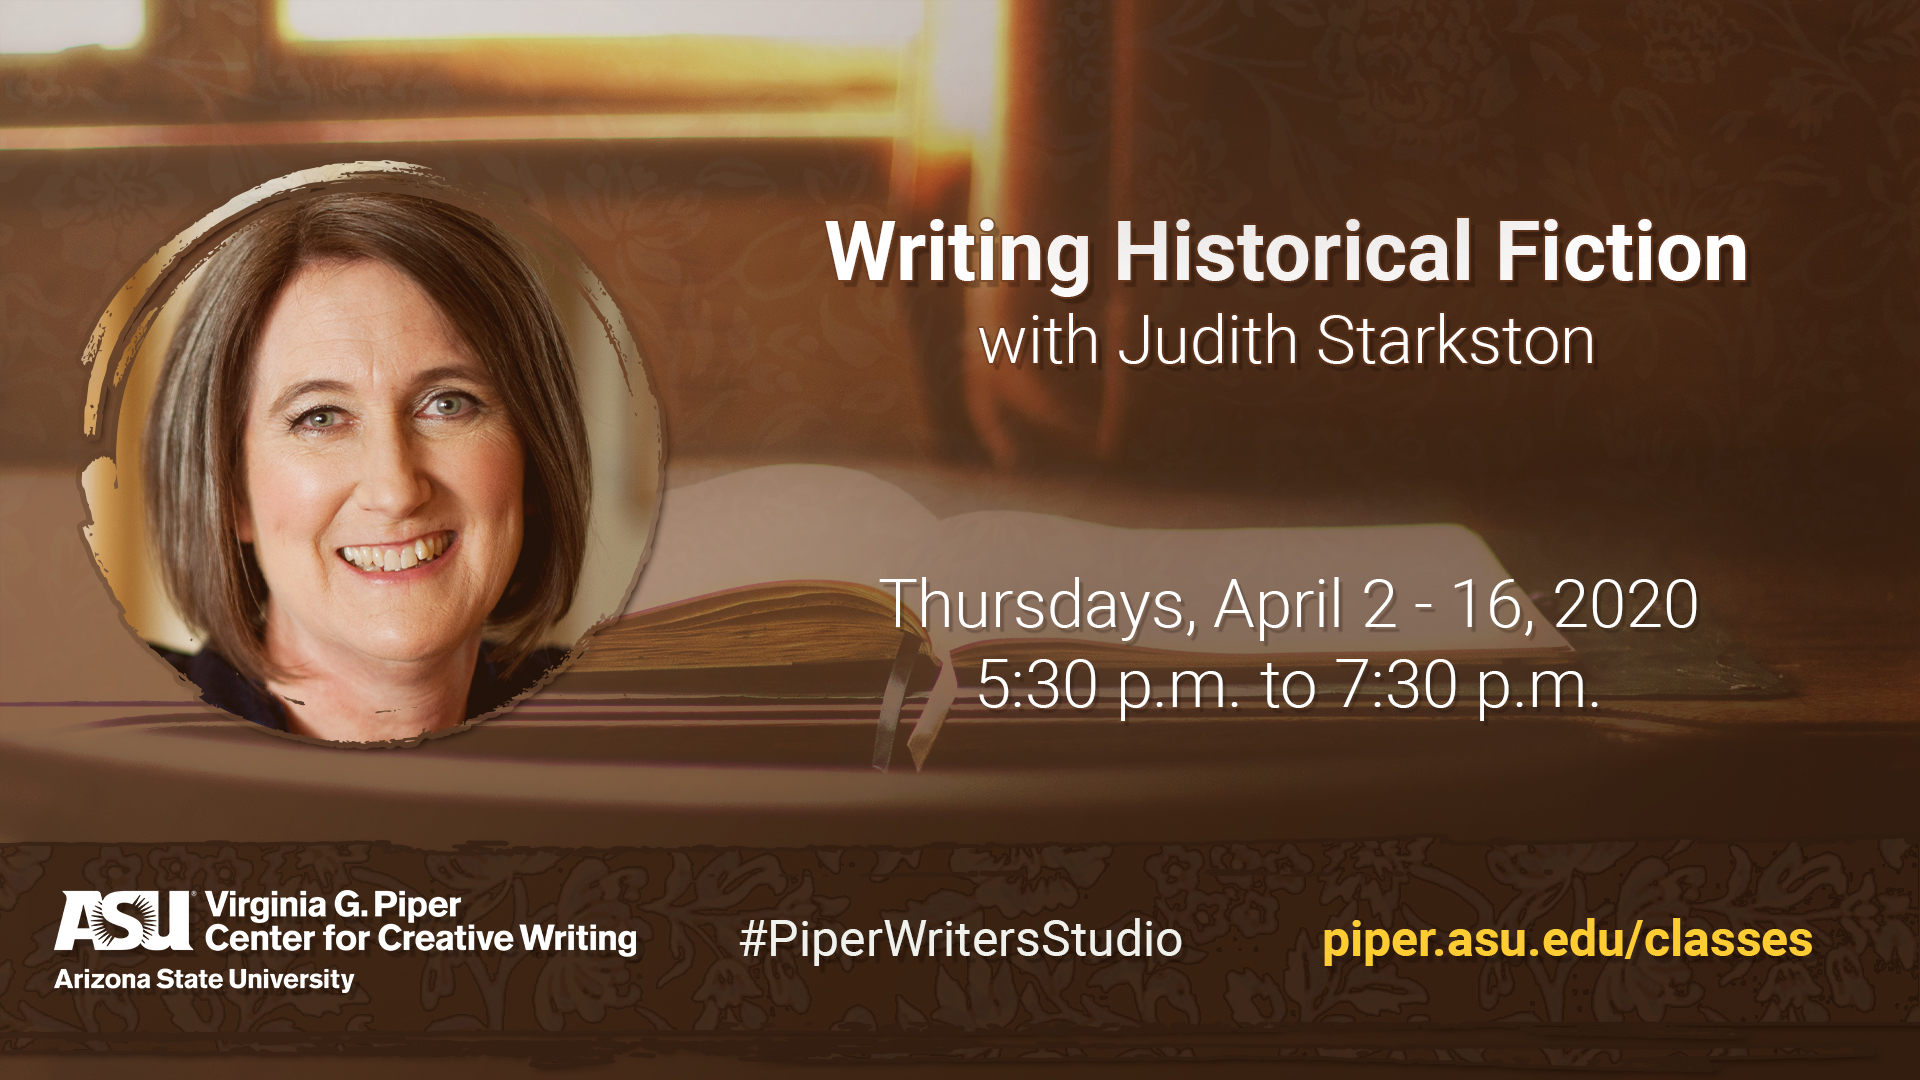 Writing Historical Fiction with Judith Starkston